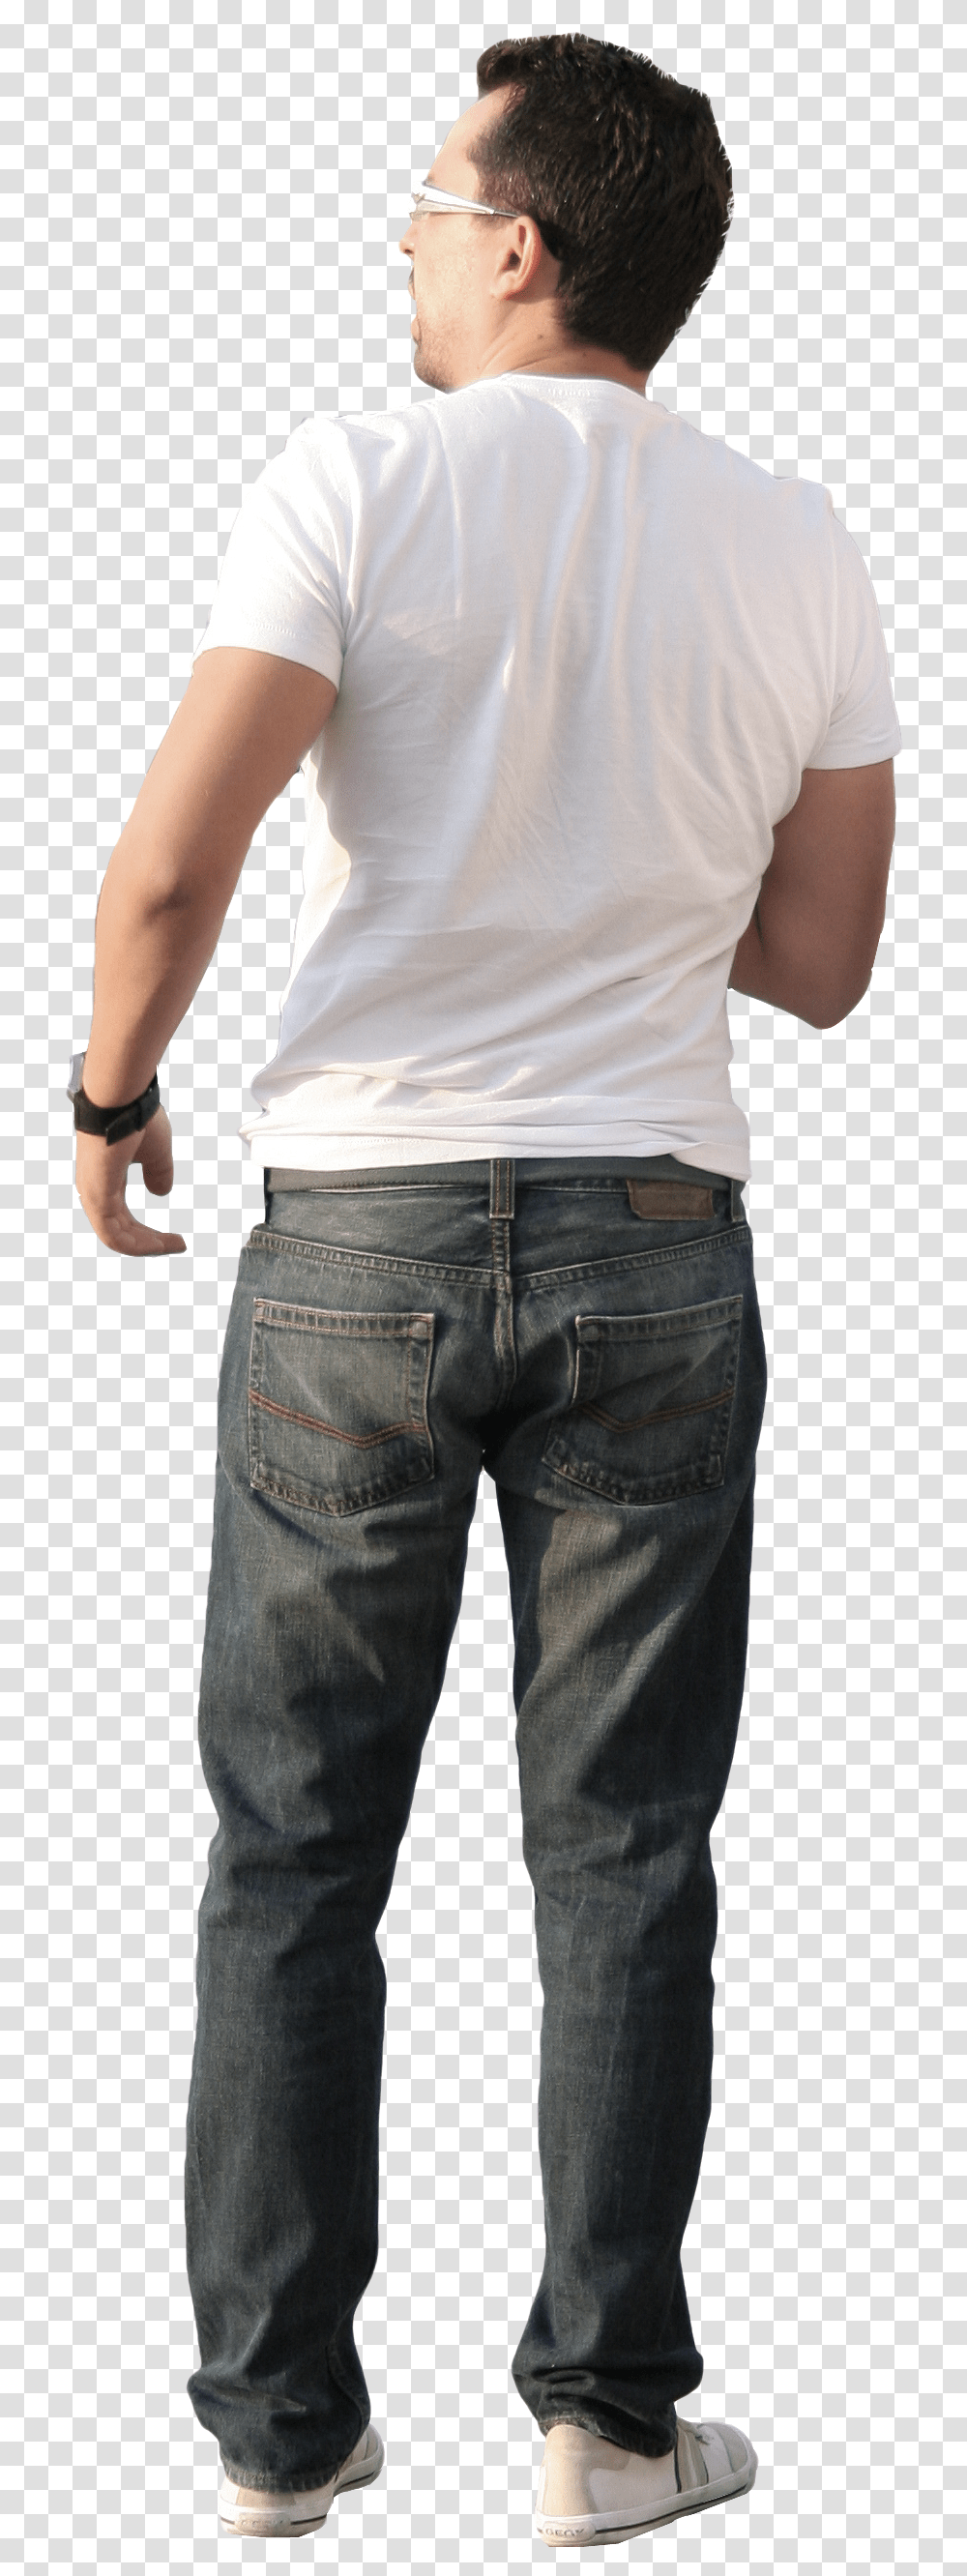 Man In White T Shirt Free Cut Out People Trees And Leaves 2d People, Pants, Clothing, Person, Jeans Transparent Png